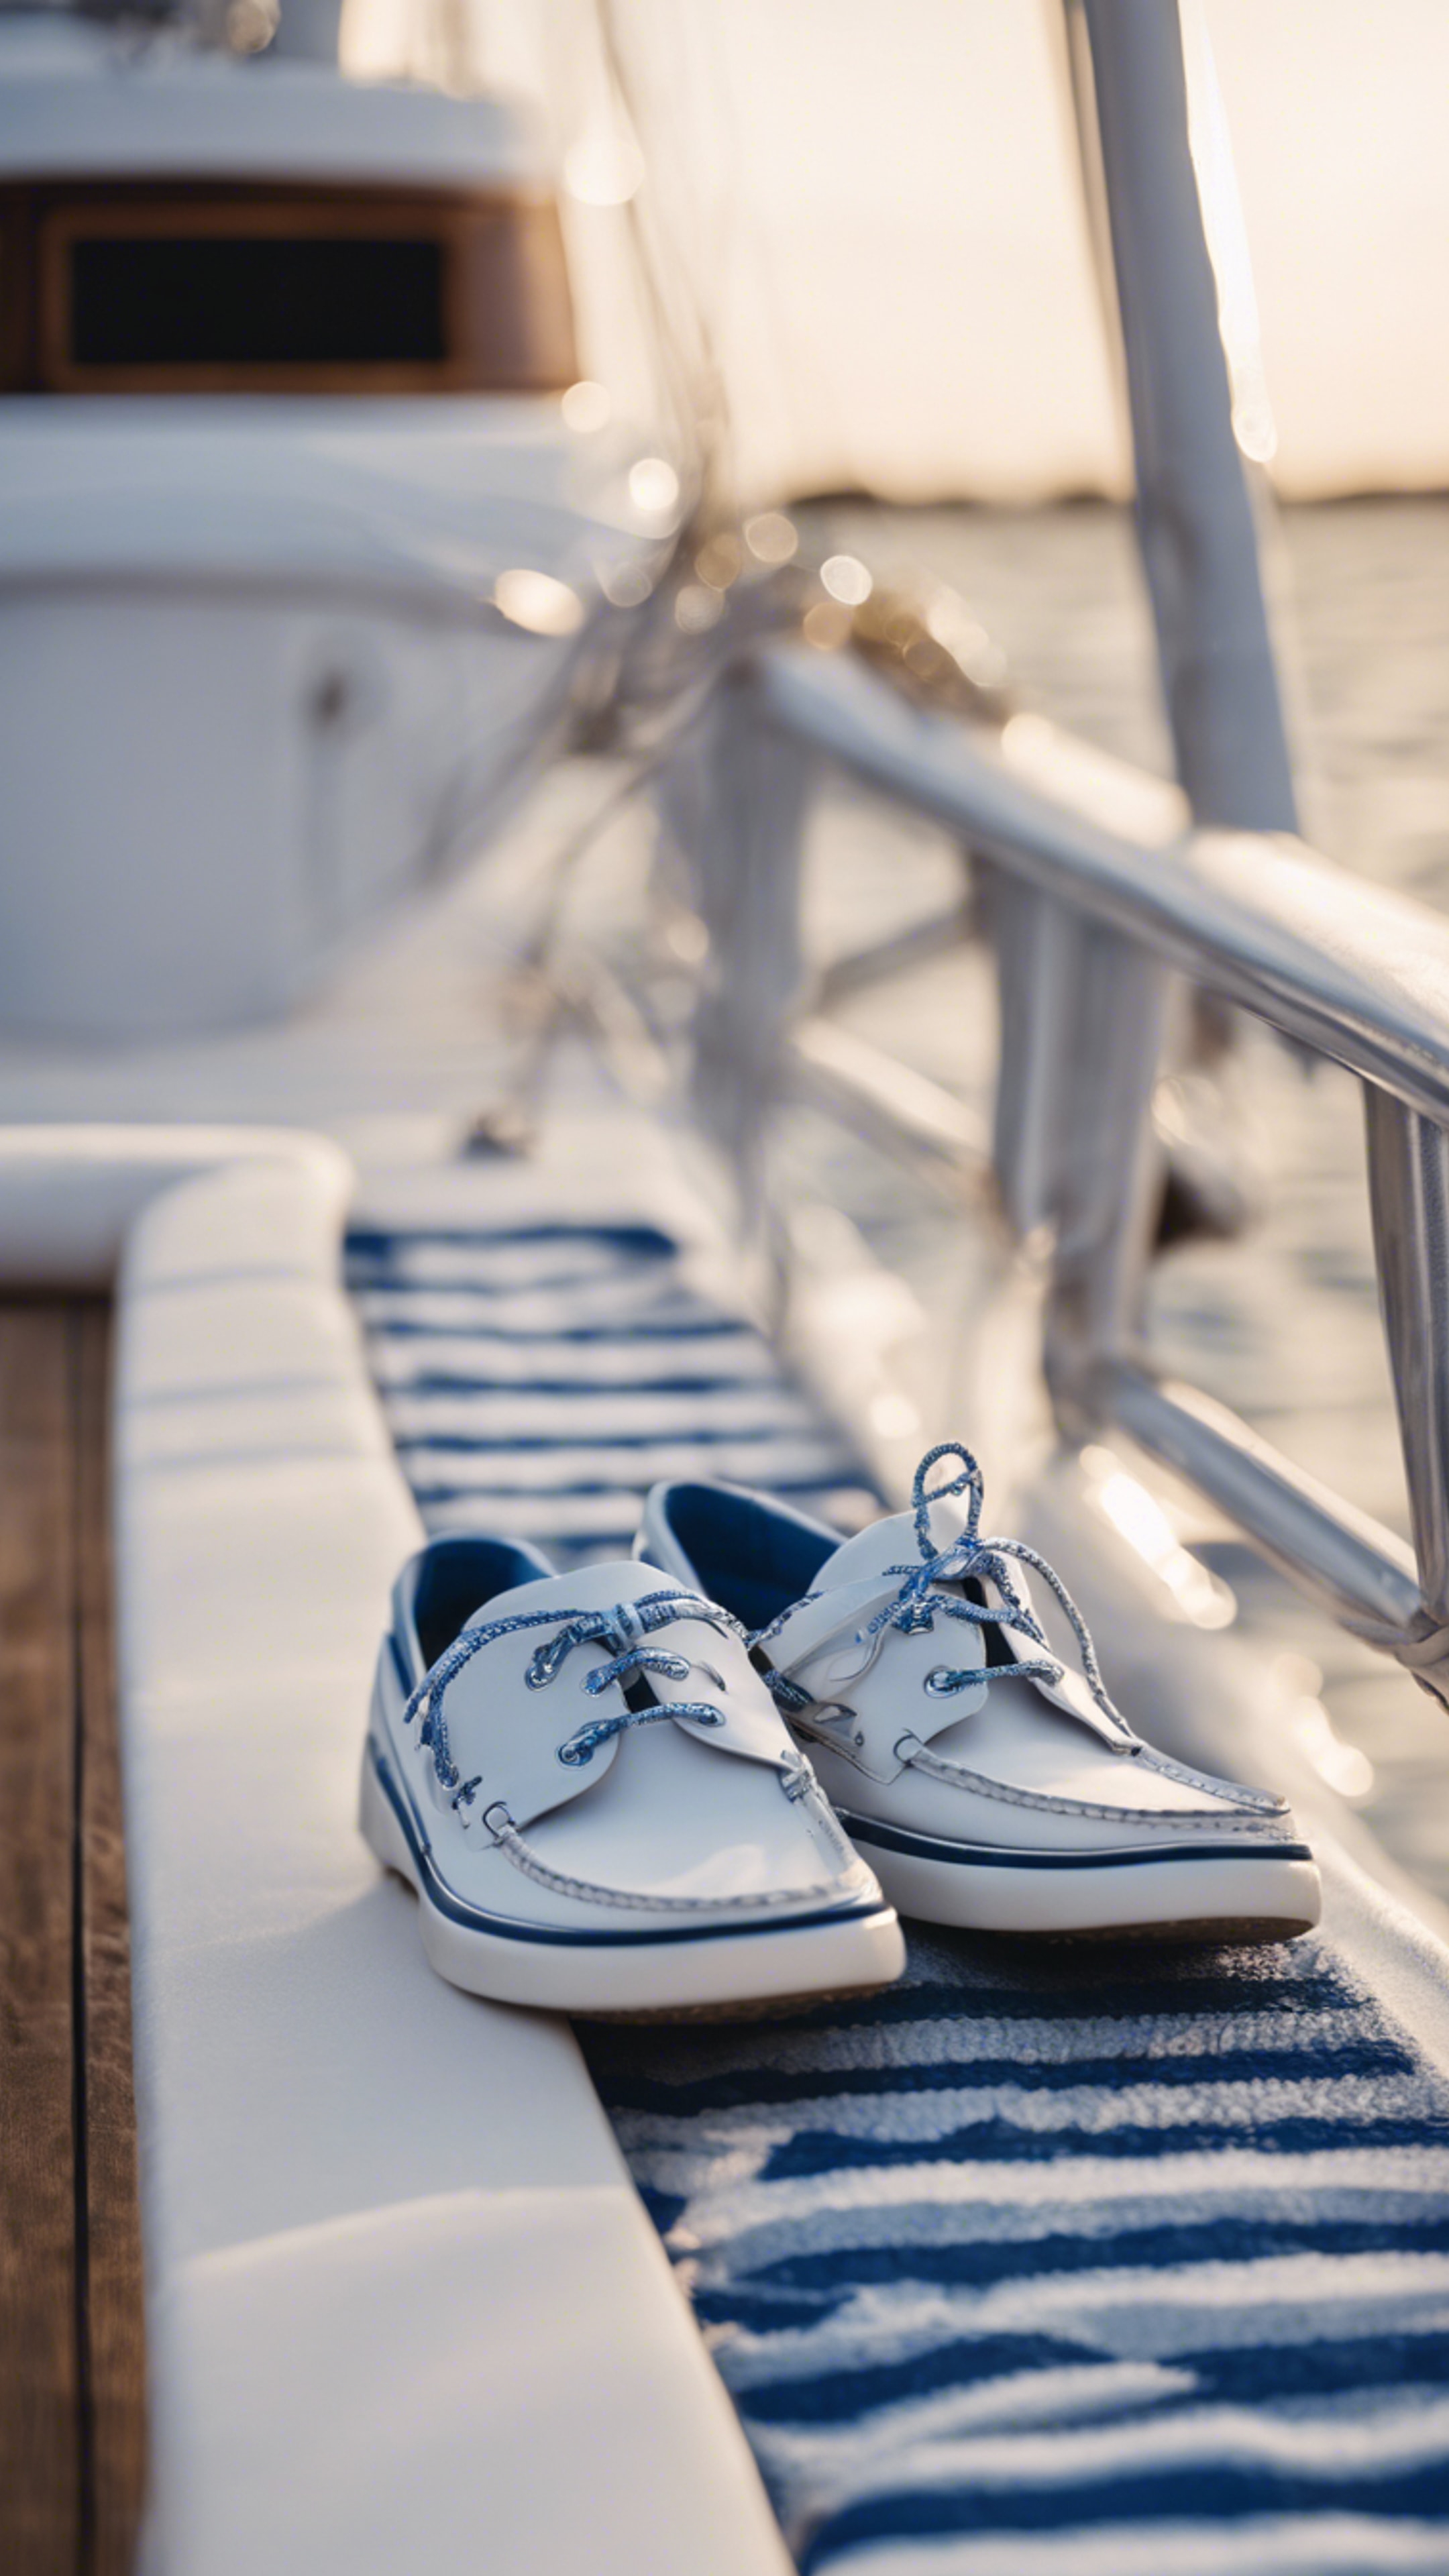 A pair of blue and white boat shoes resting on a yacht deck, reflecting preppy fashion. Papel de parede[e5e4a620cbd541dd8bee]